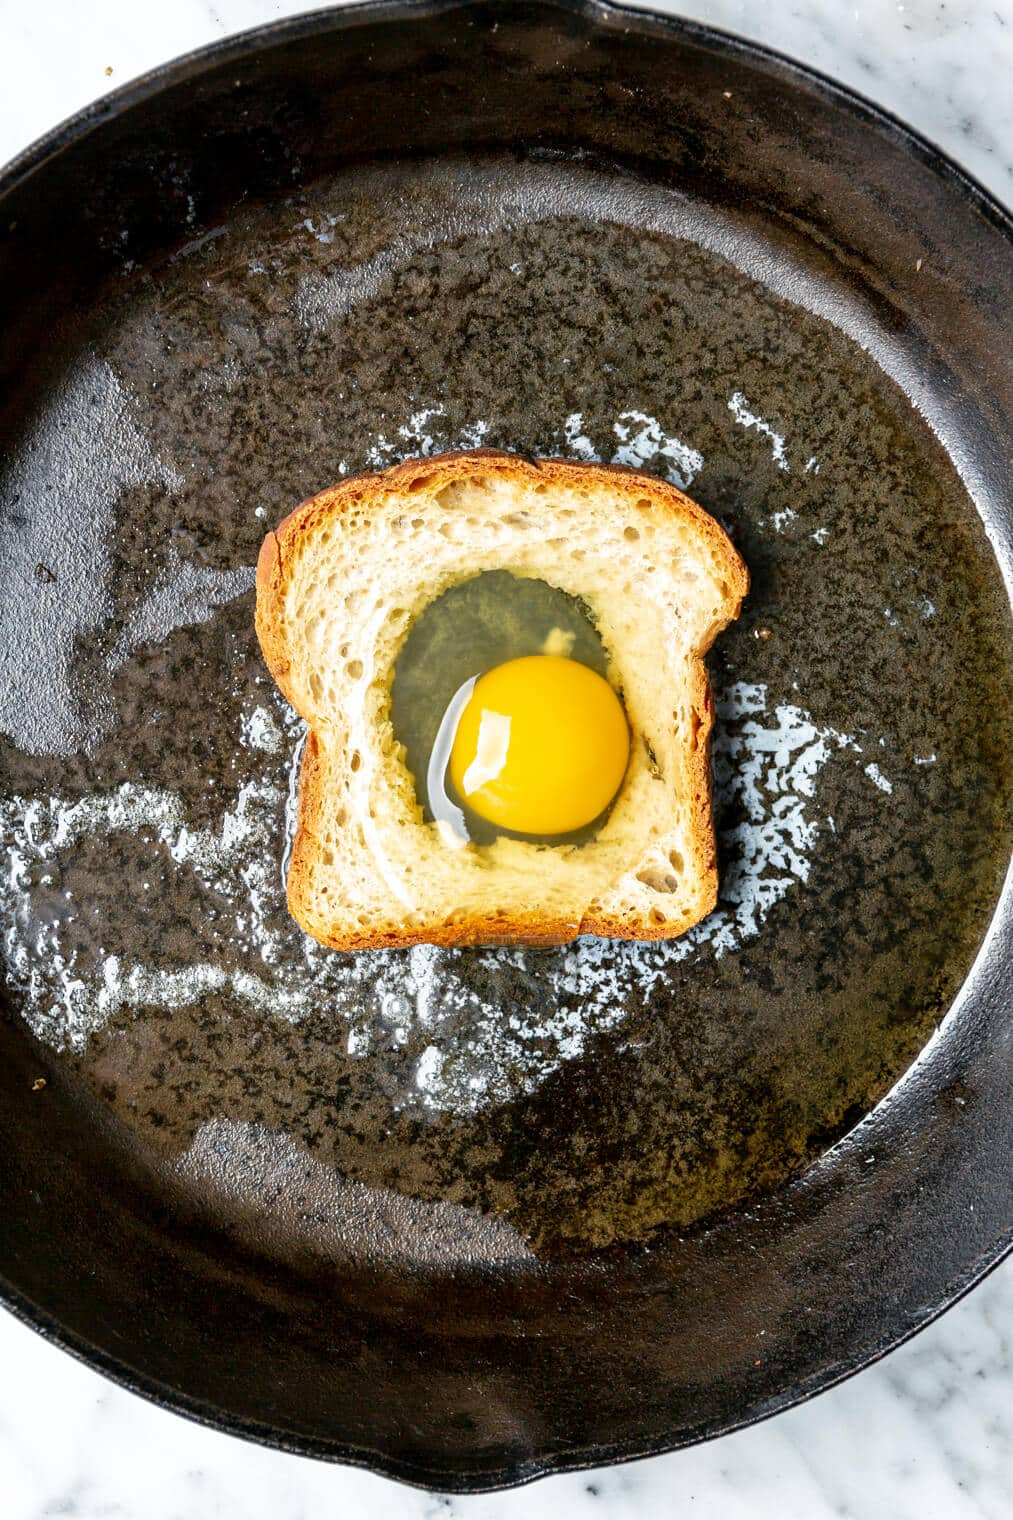 Slice of bread with hole in middle with an egg cracked in the hole in a cast iron skillet with melted butter.